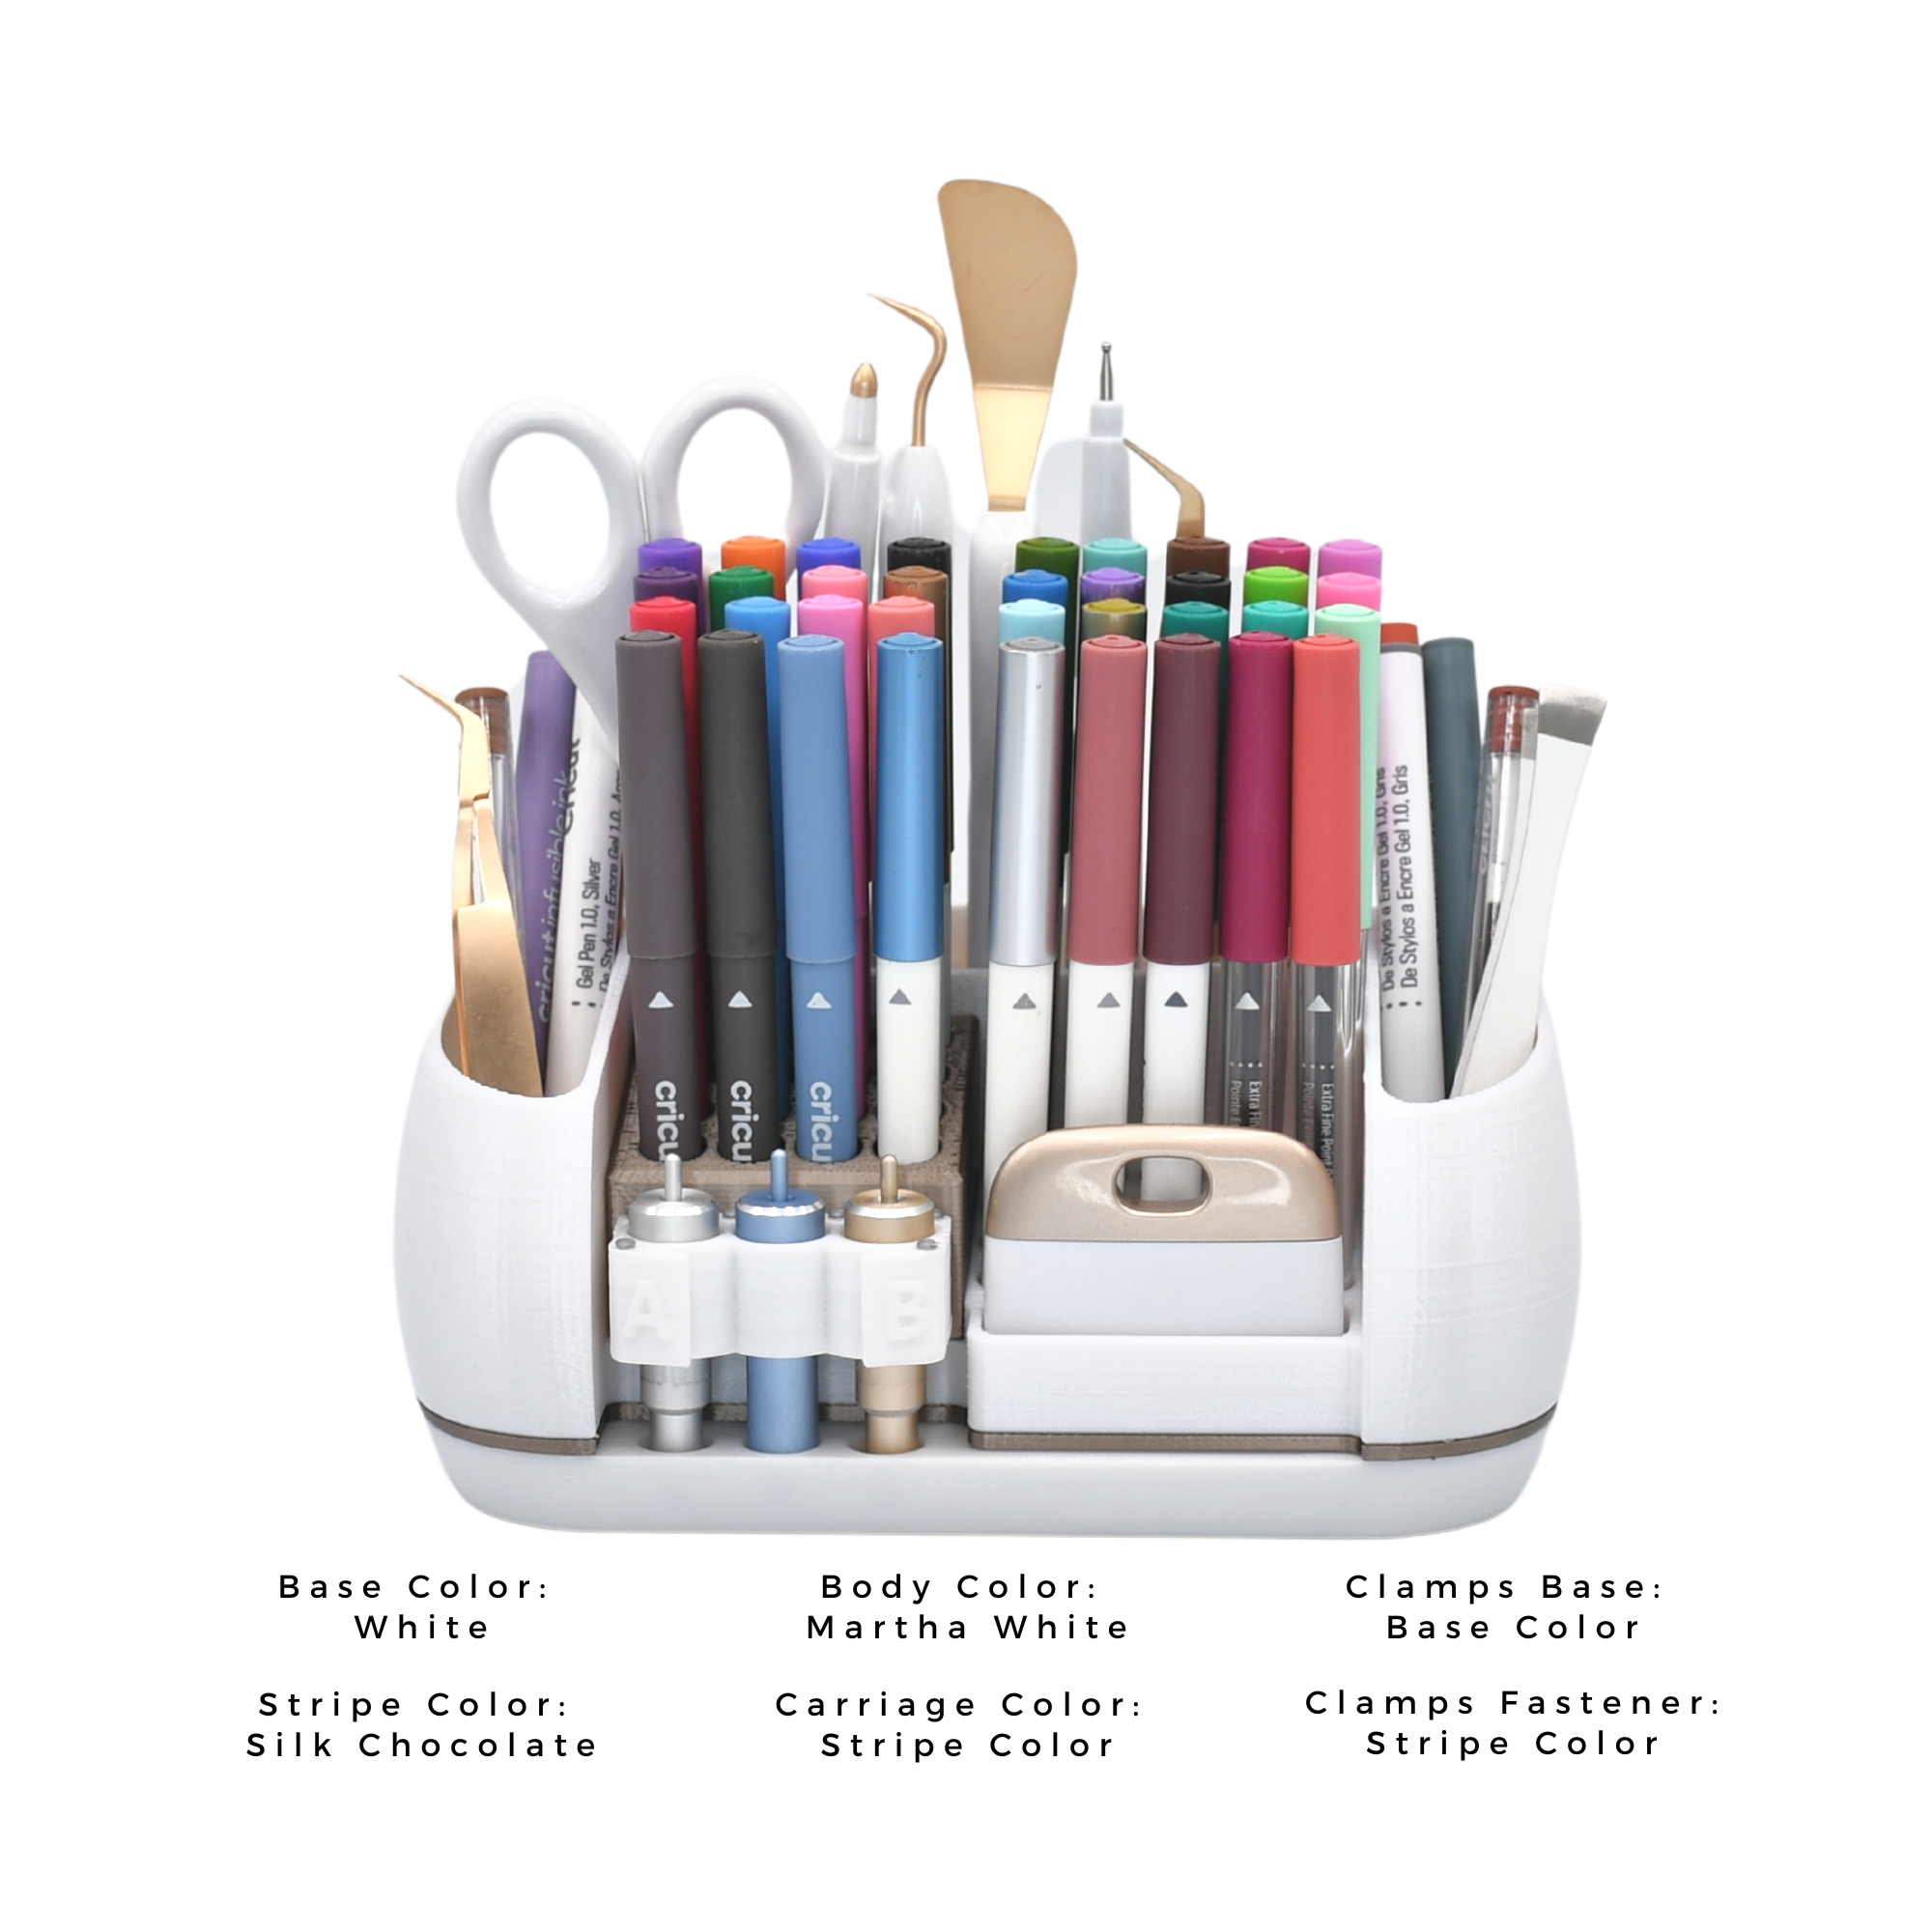 World's Cutest Cricut® Explorer Tool Caddy / Small Fry 2.0 Tool Holder® or  Organizer for Cricut® Essential Tool Set and More 